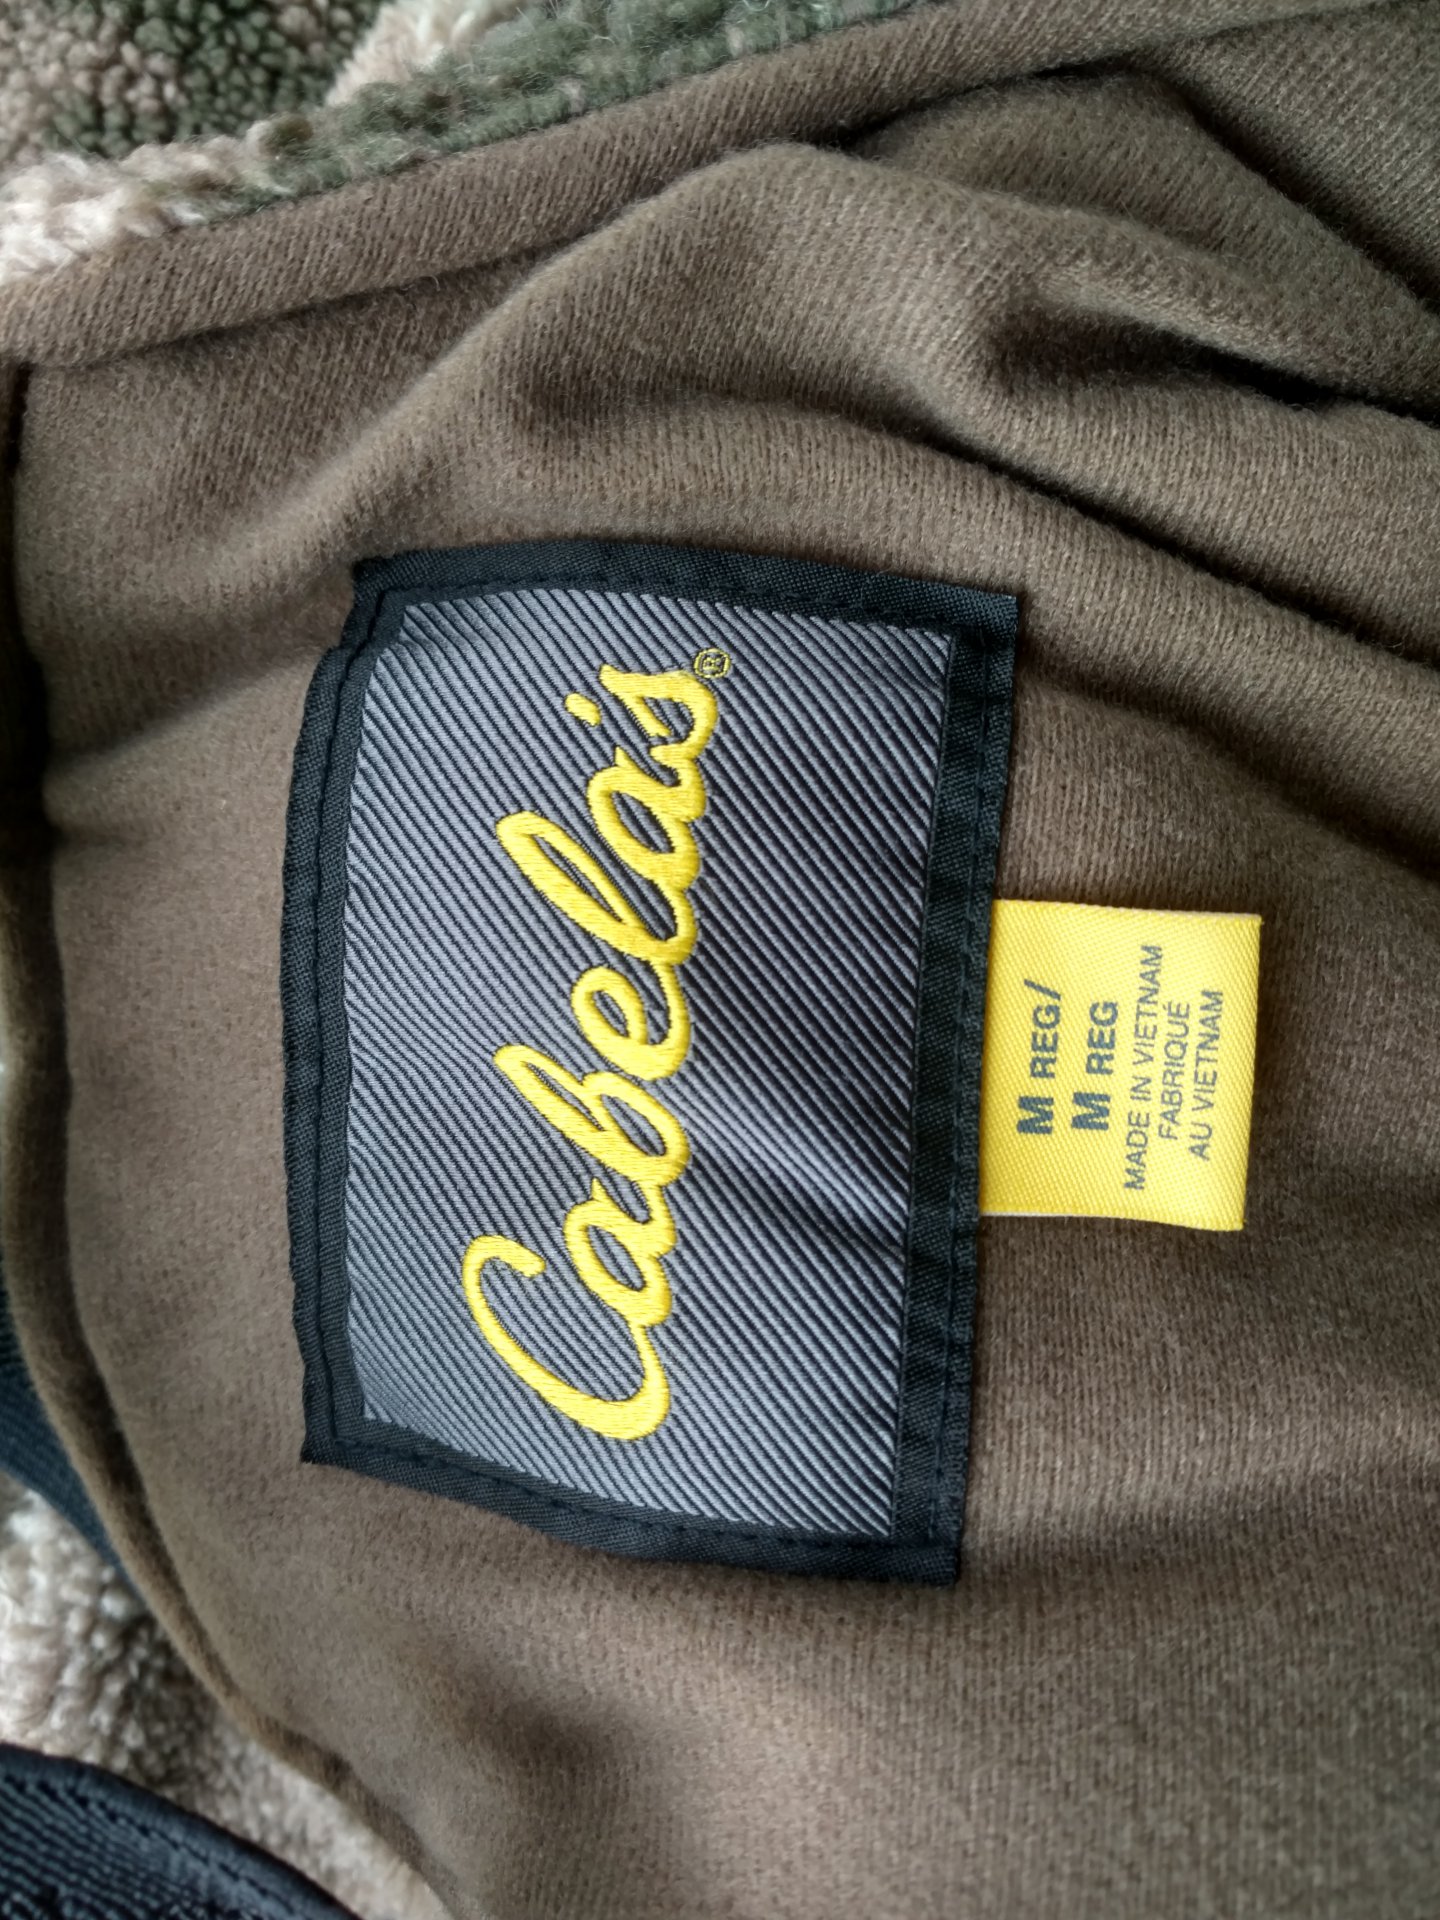 Cabela's Woolitmate Clothing - Hunting Items For Sale and Trade ...